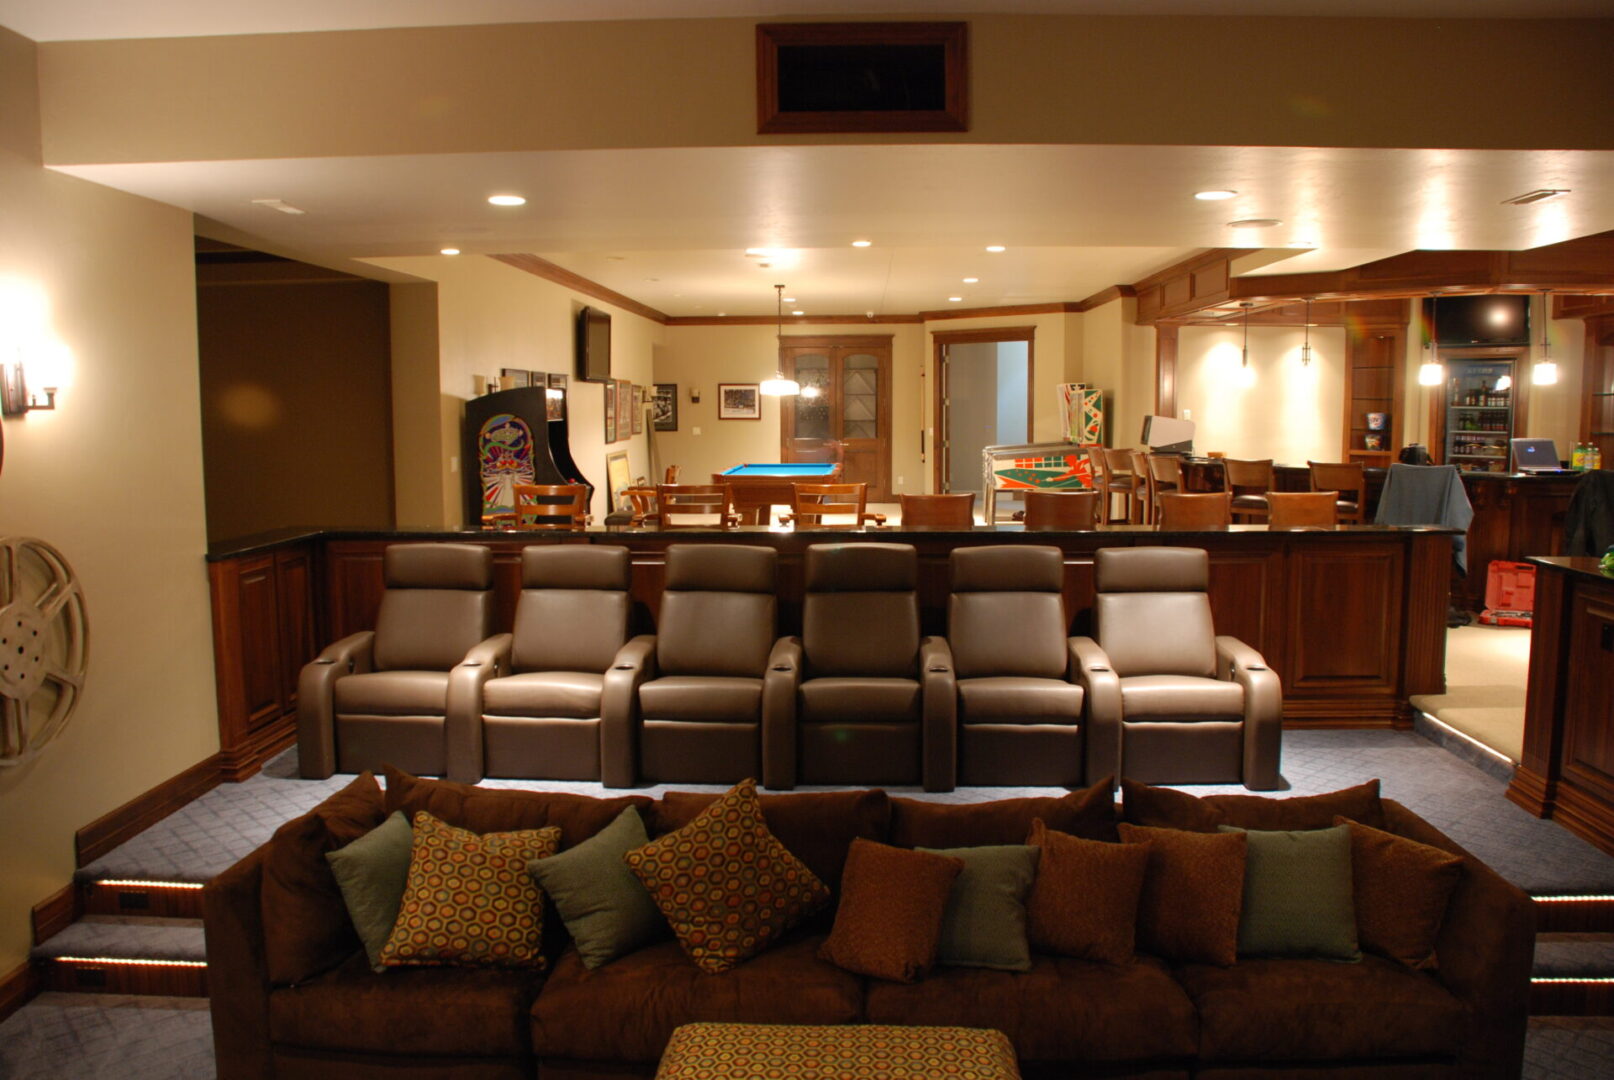 View of a home theater from the screen area